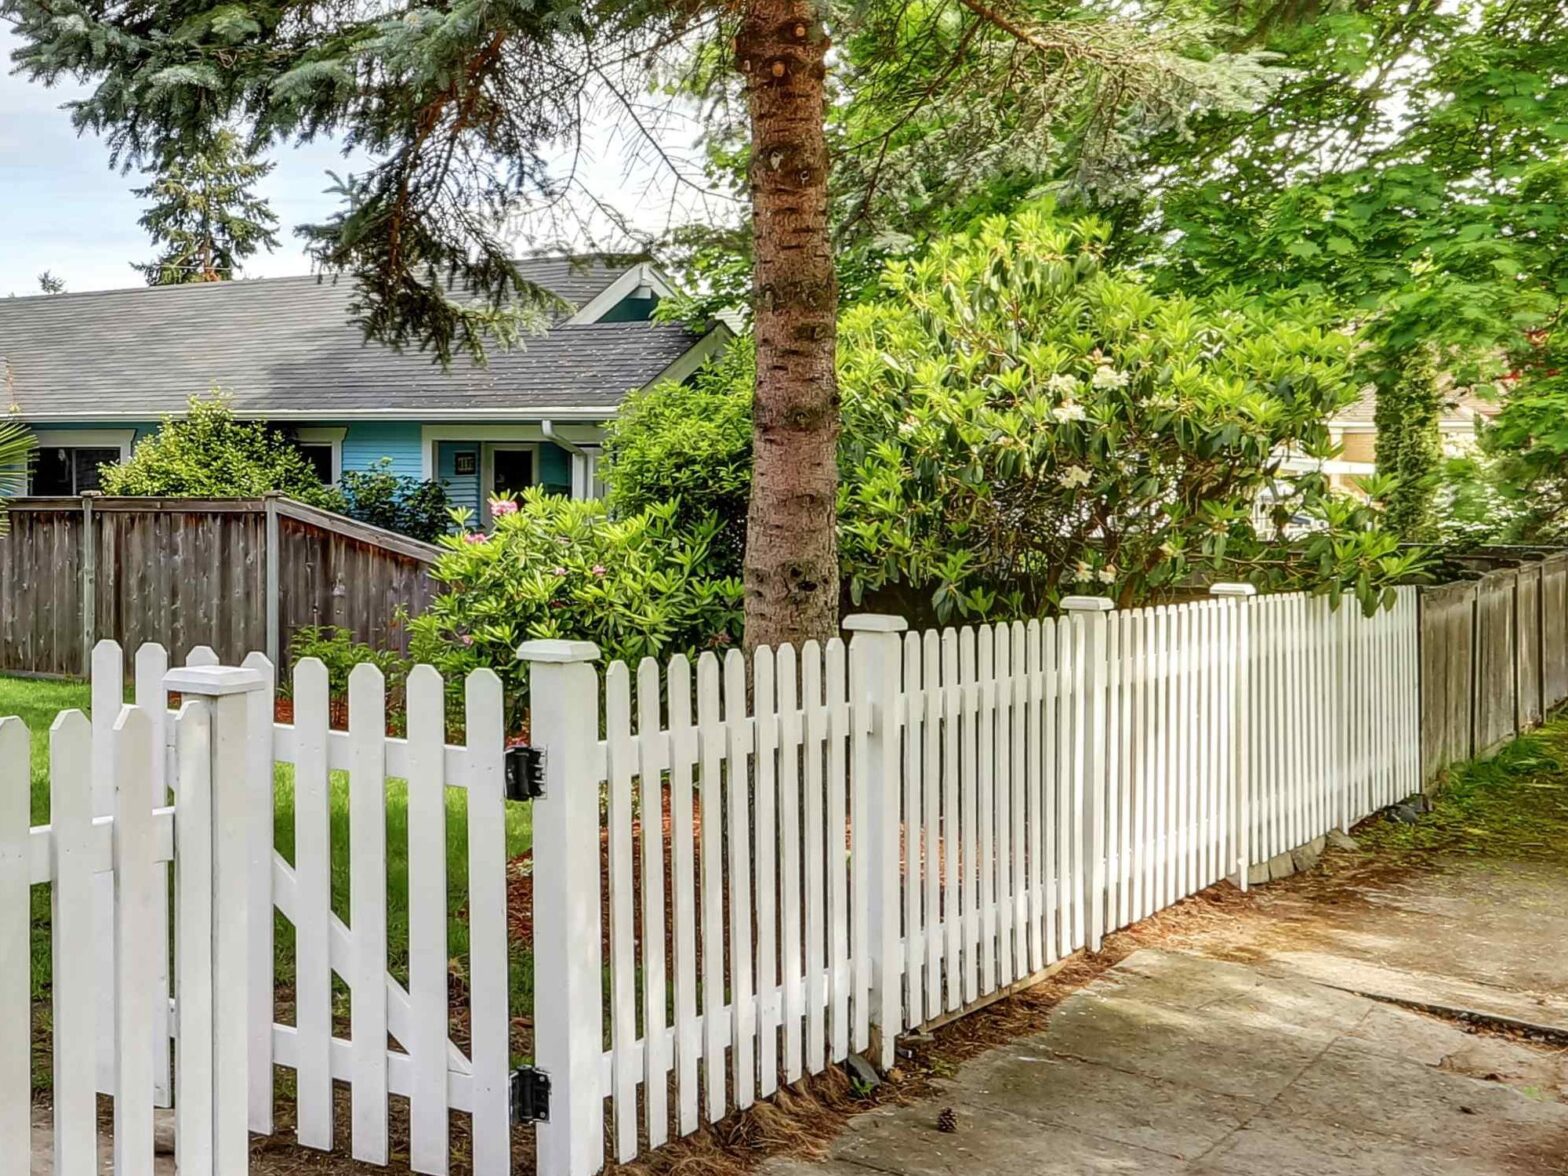 Photo of a wood picket fence in Columbia, South Carolina